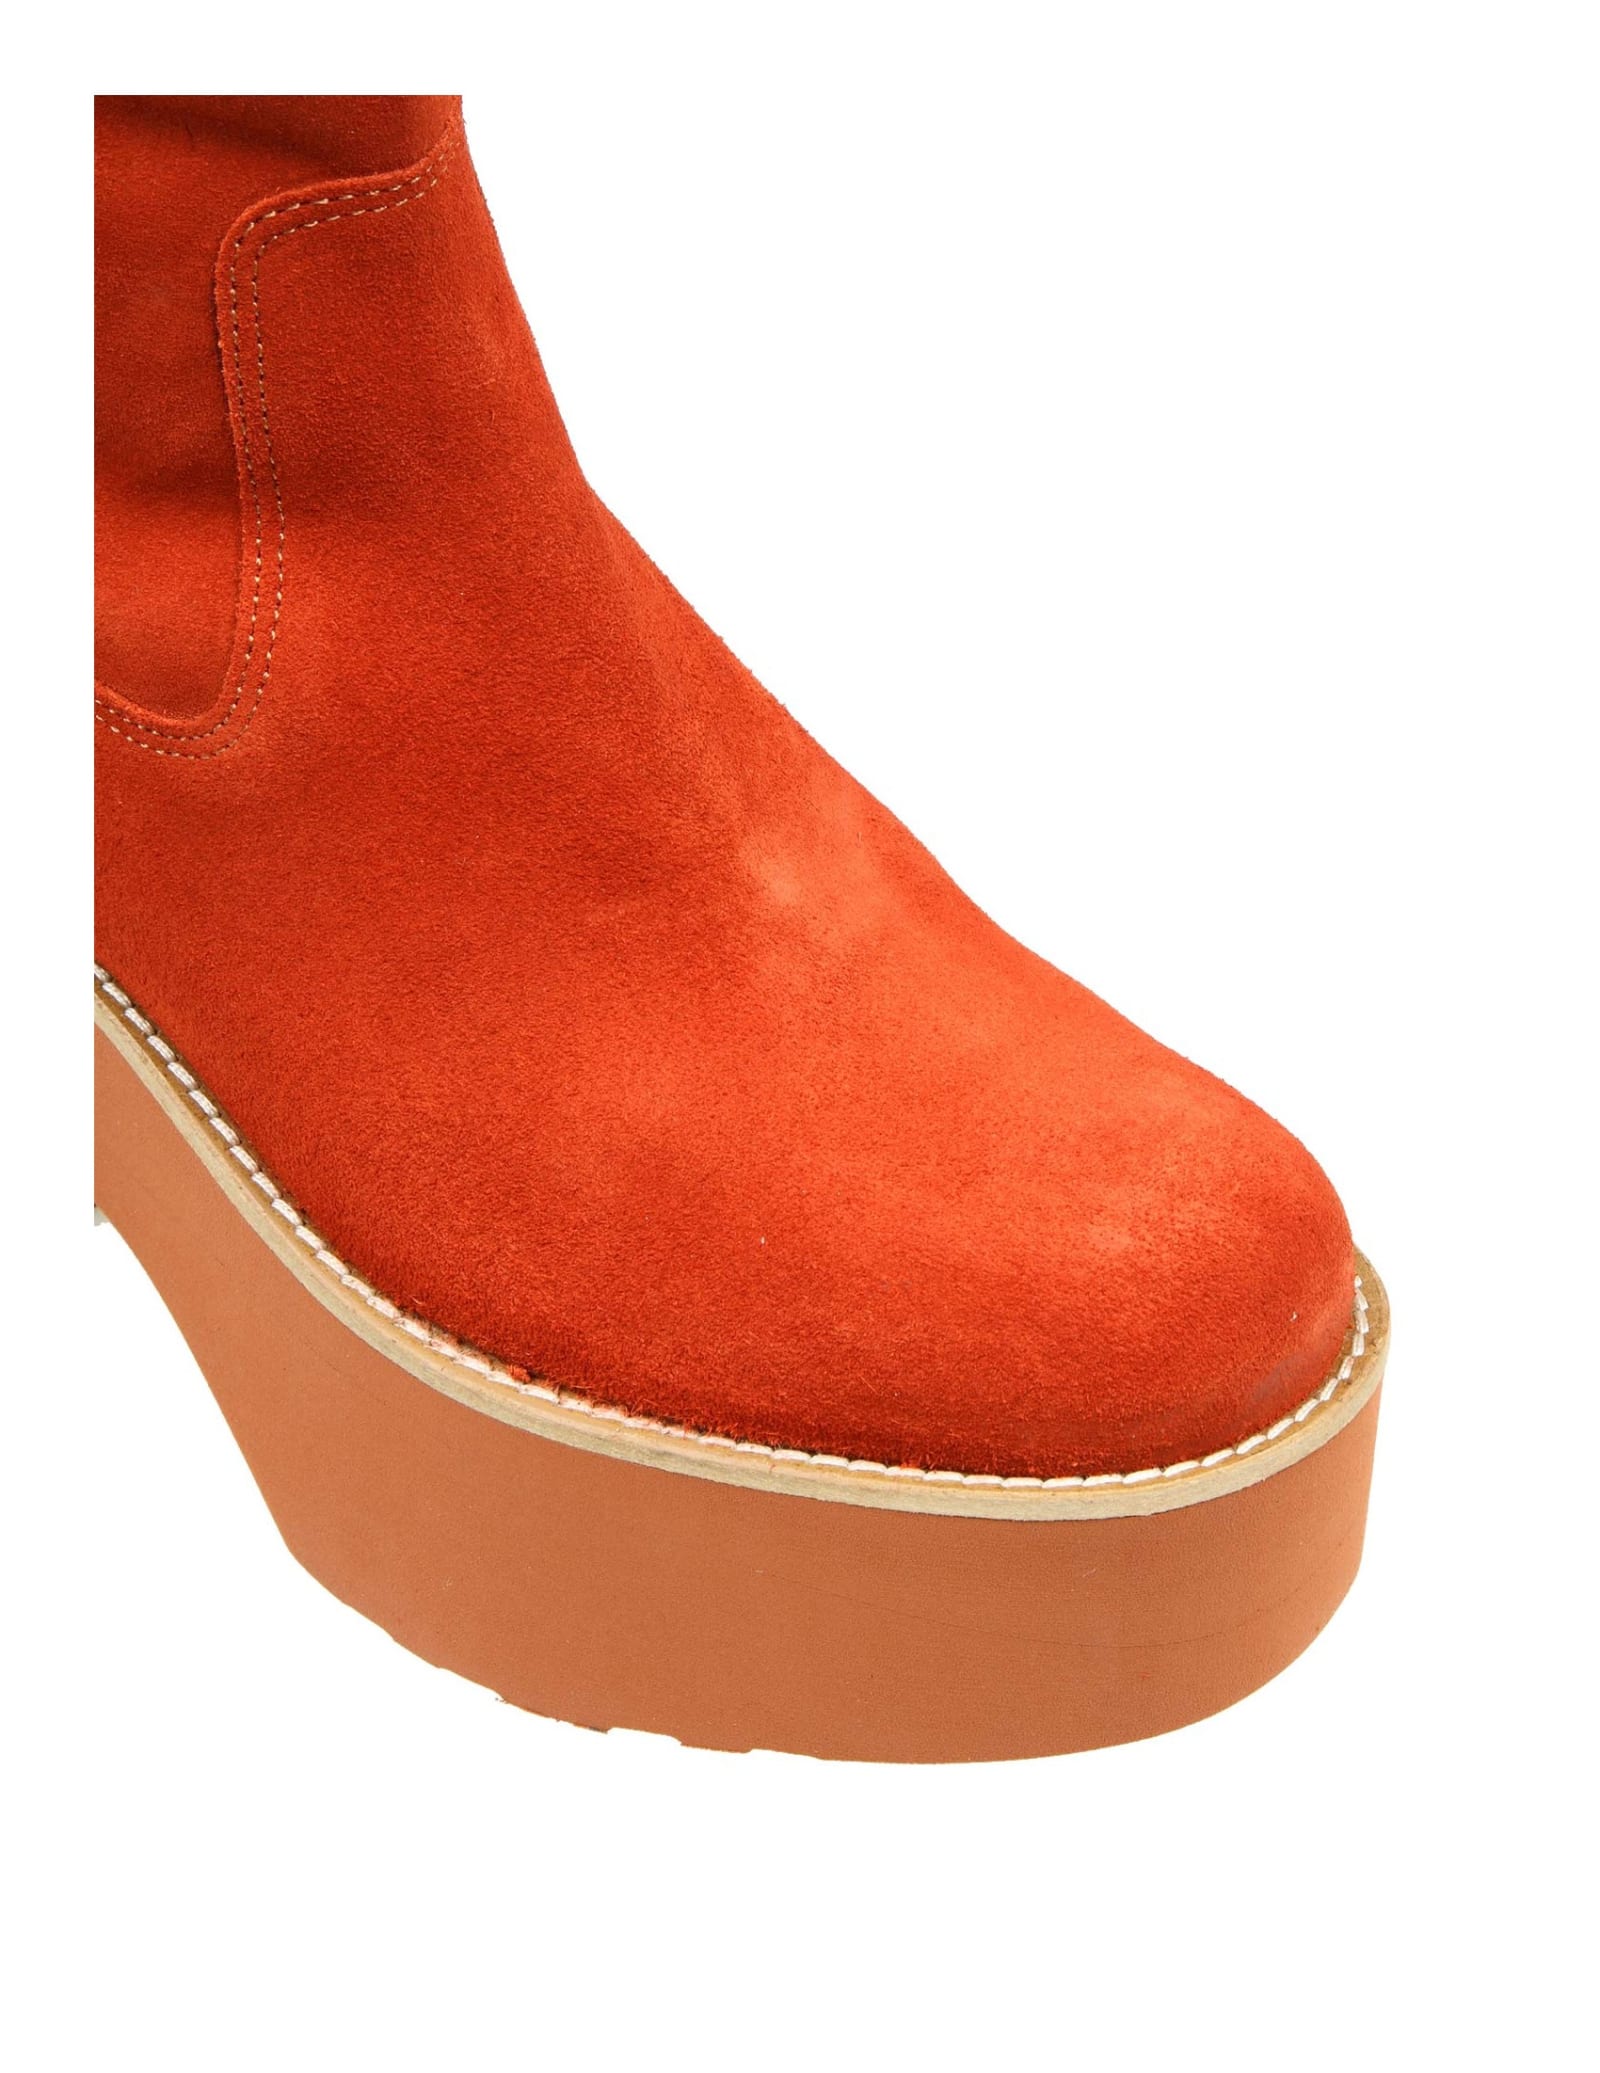 rust colored ankle boots